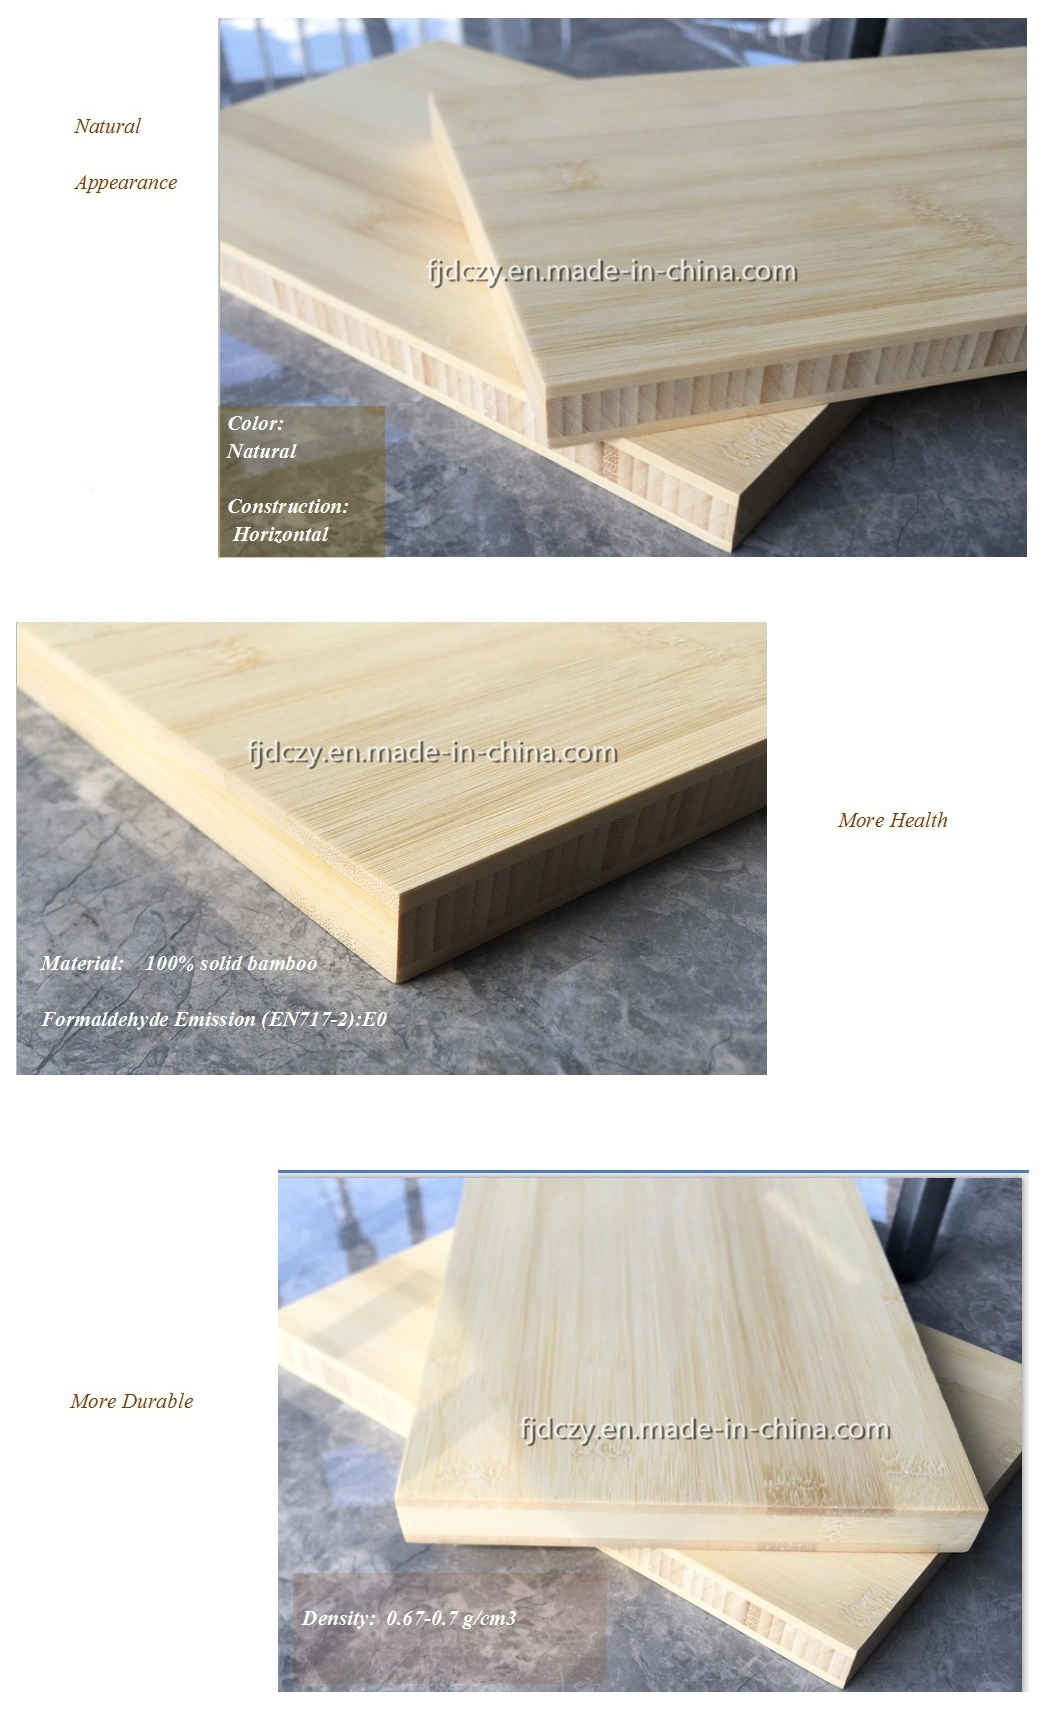 Multiply Counter Top Tabletop Construction Bamboo Plywood Furniture Board